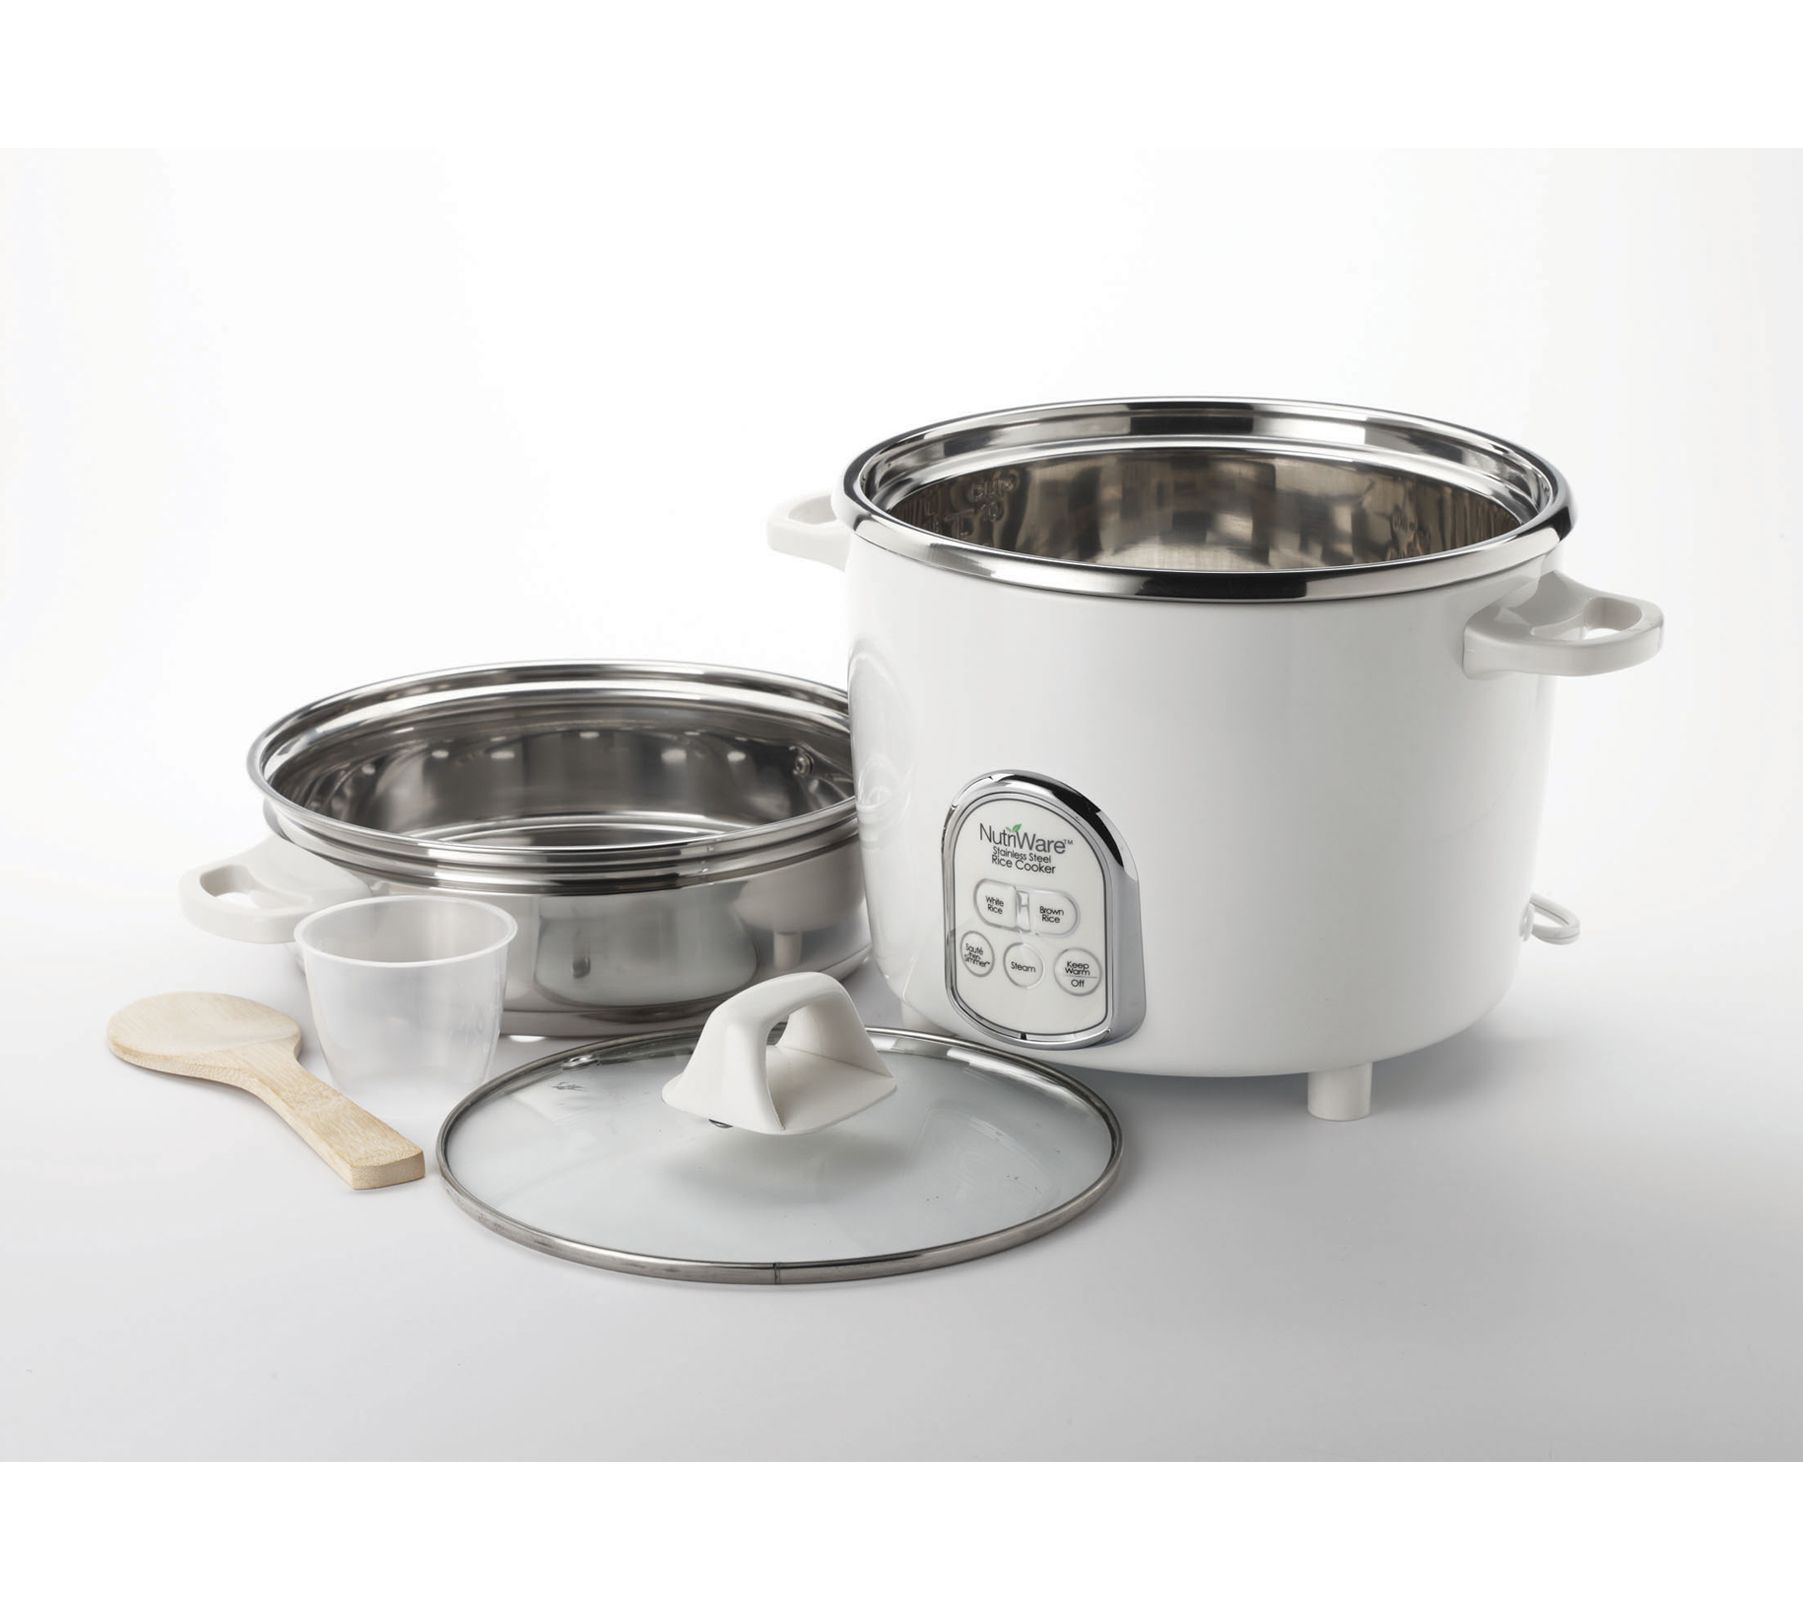 Aroma ARC-150SB Multi-Cooker Review - Consumer Reports